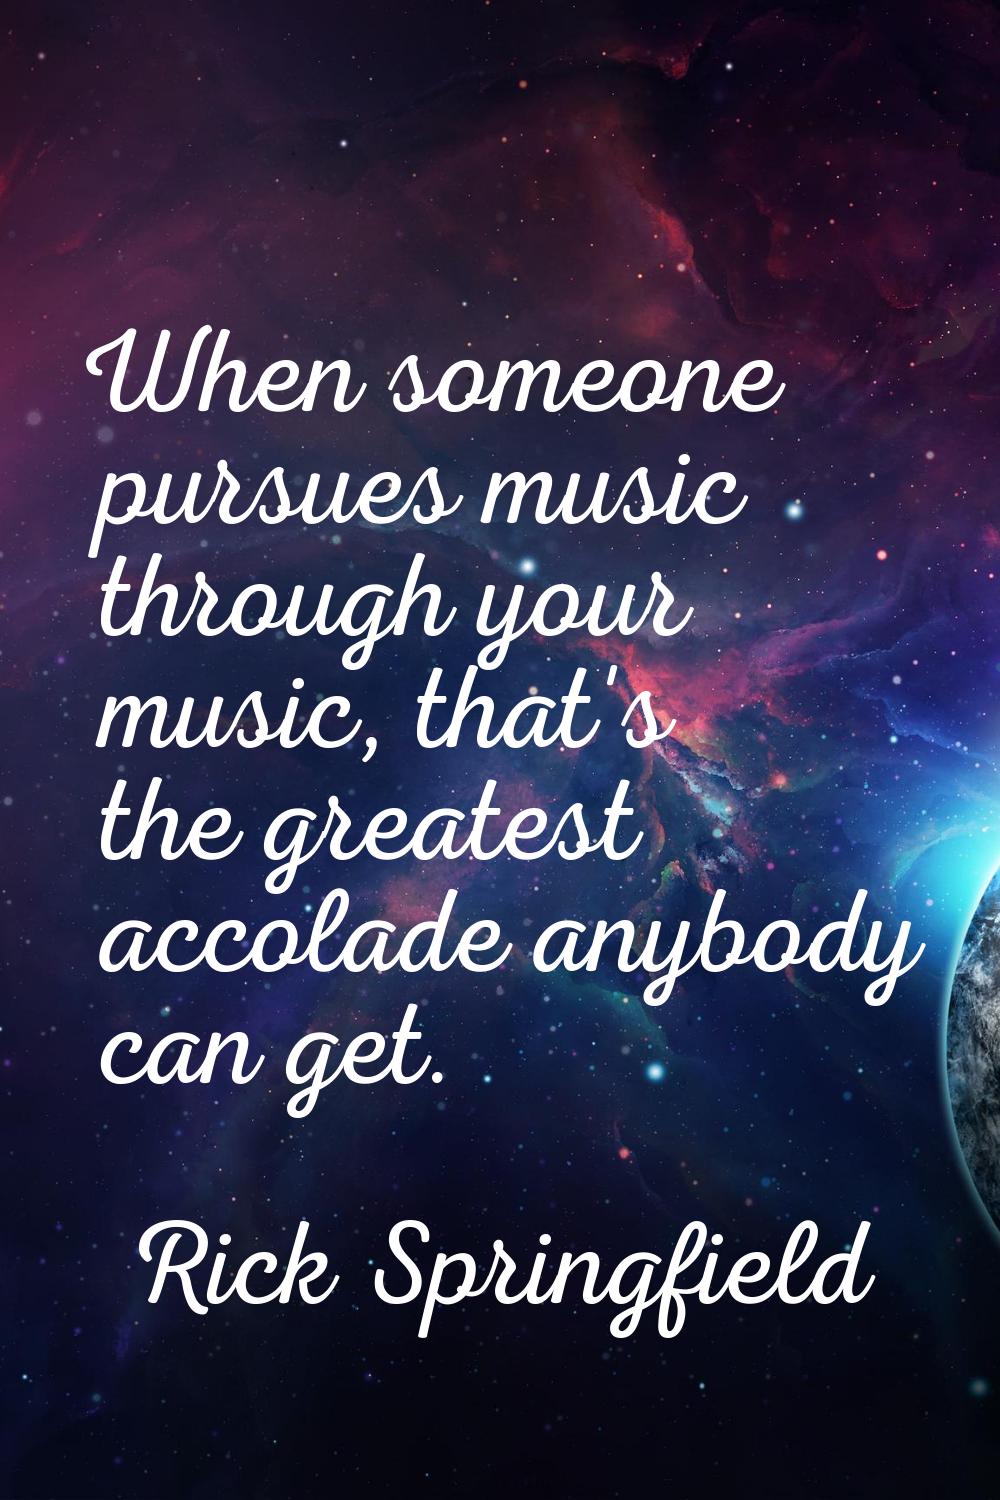 When someone pursues music through your music, that's the greatest accolade anybody can get.